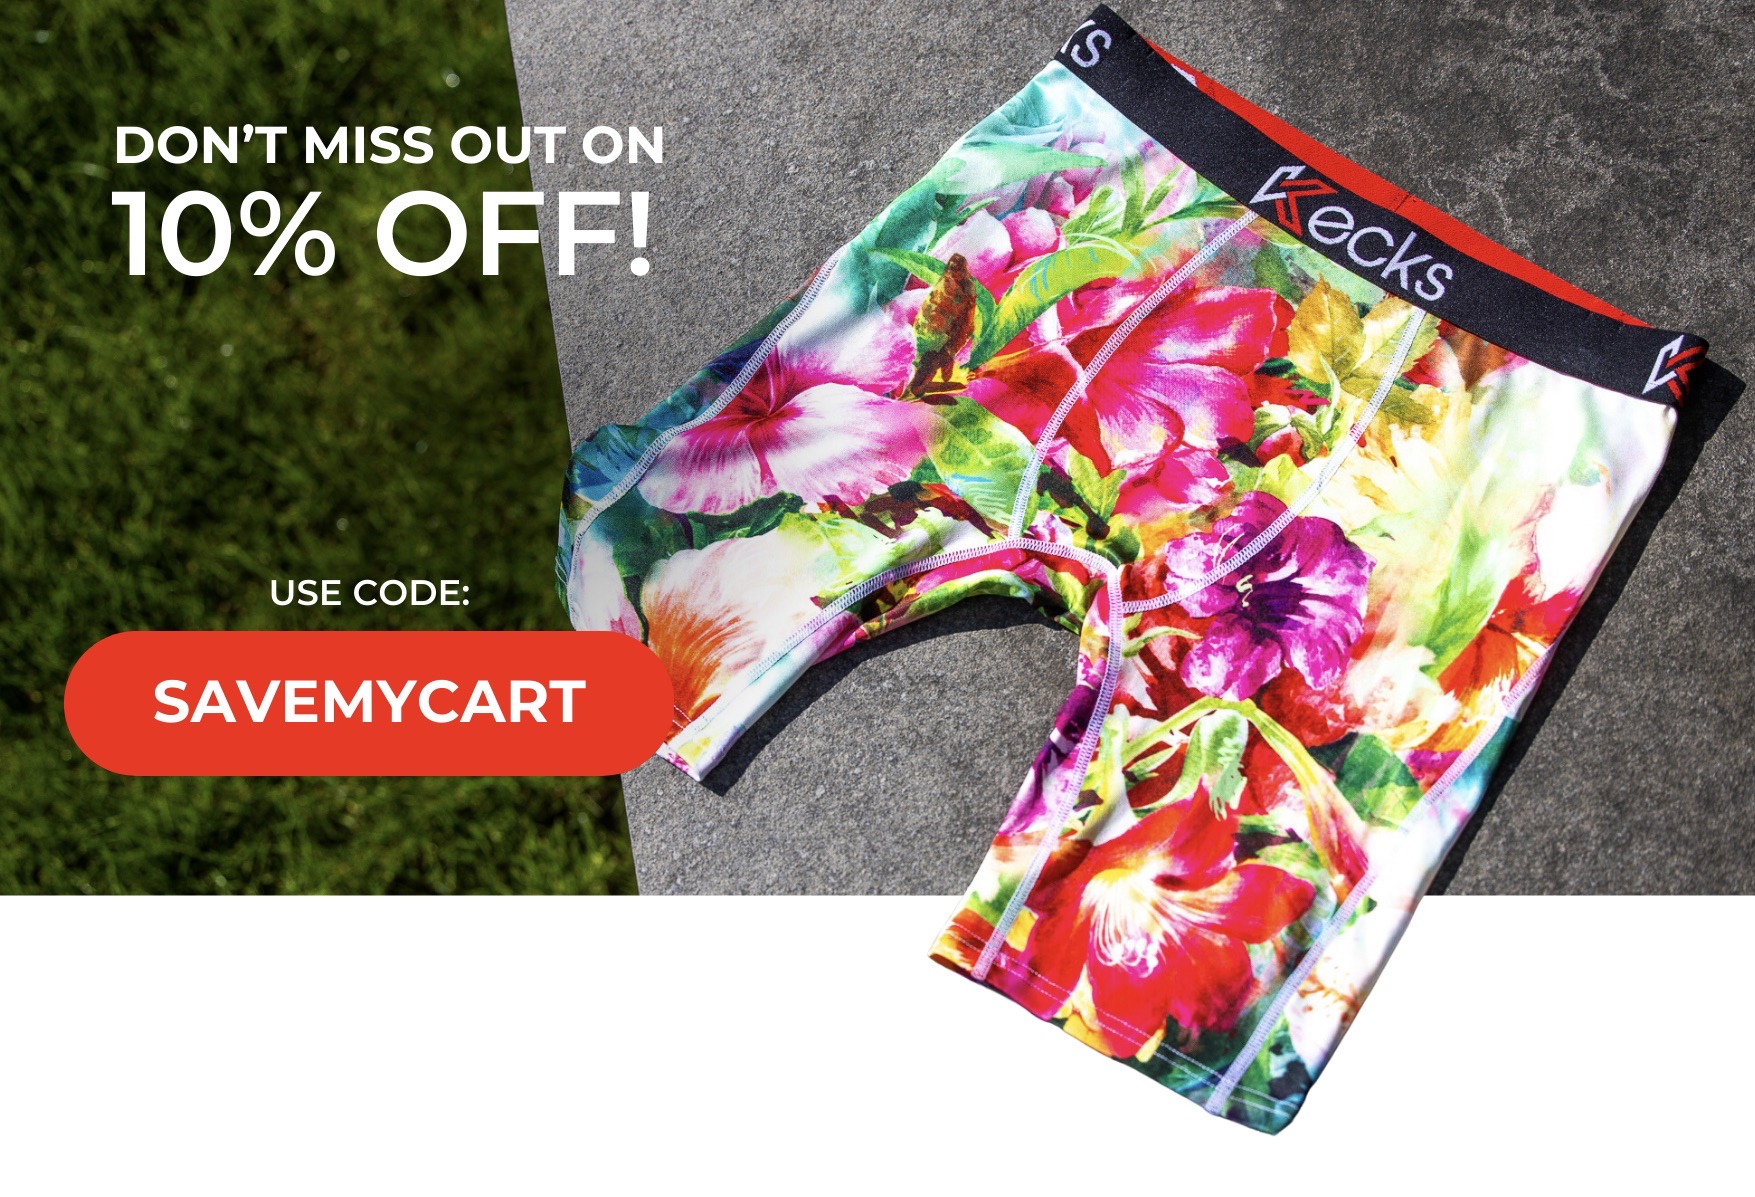 Don't miss out on 10% off your cart! - Kecks